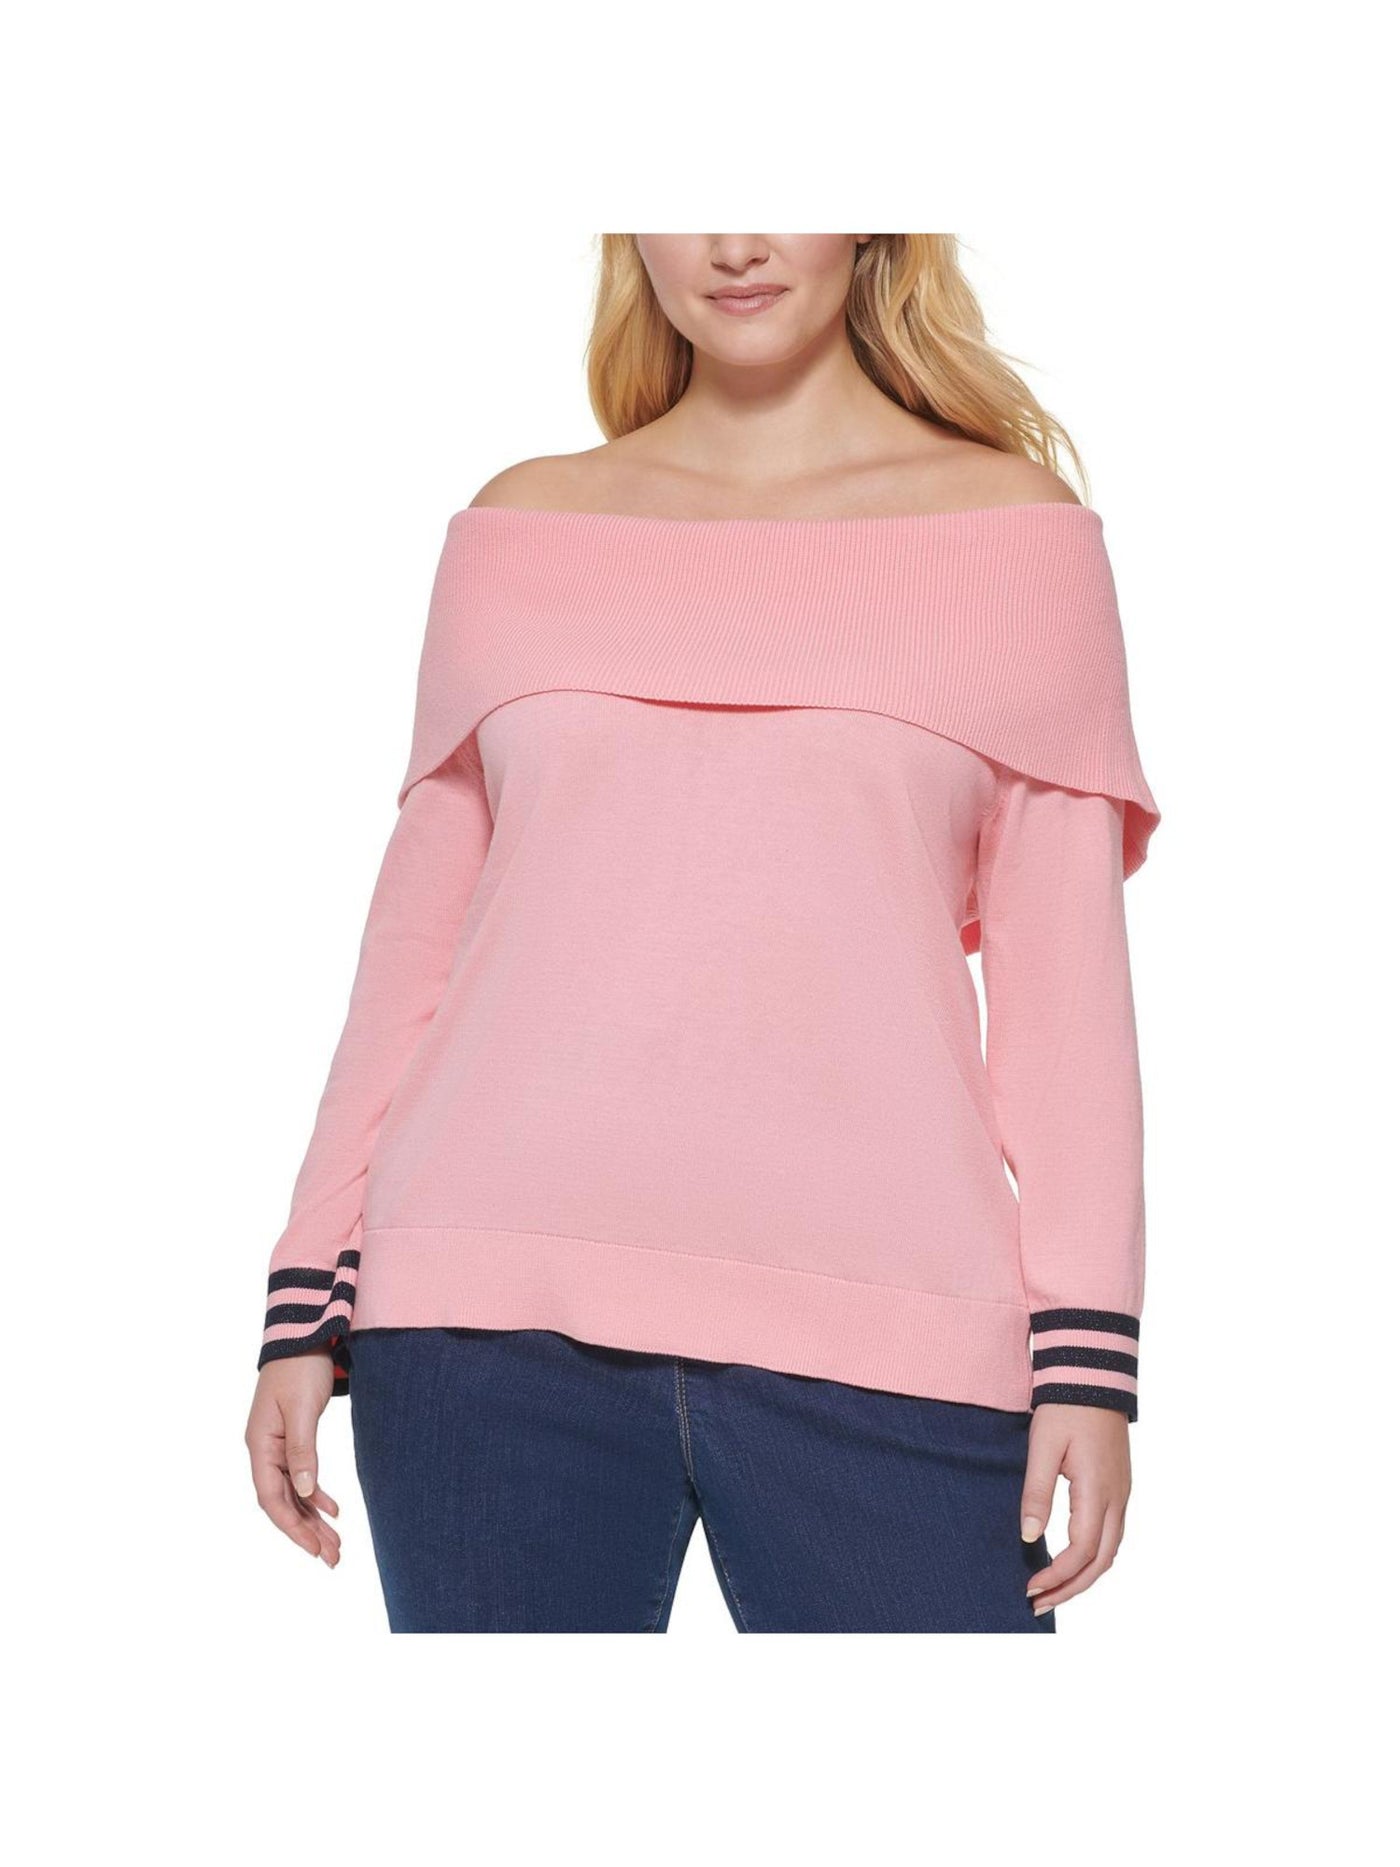 TOMMY HILFIGER Womens Pink Knit Glitter Ribbed Embroidered Logo Striped Long Sleeve Off Shoulder Sweater Plus 0X